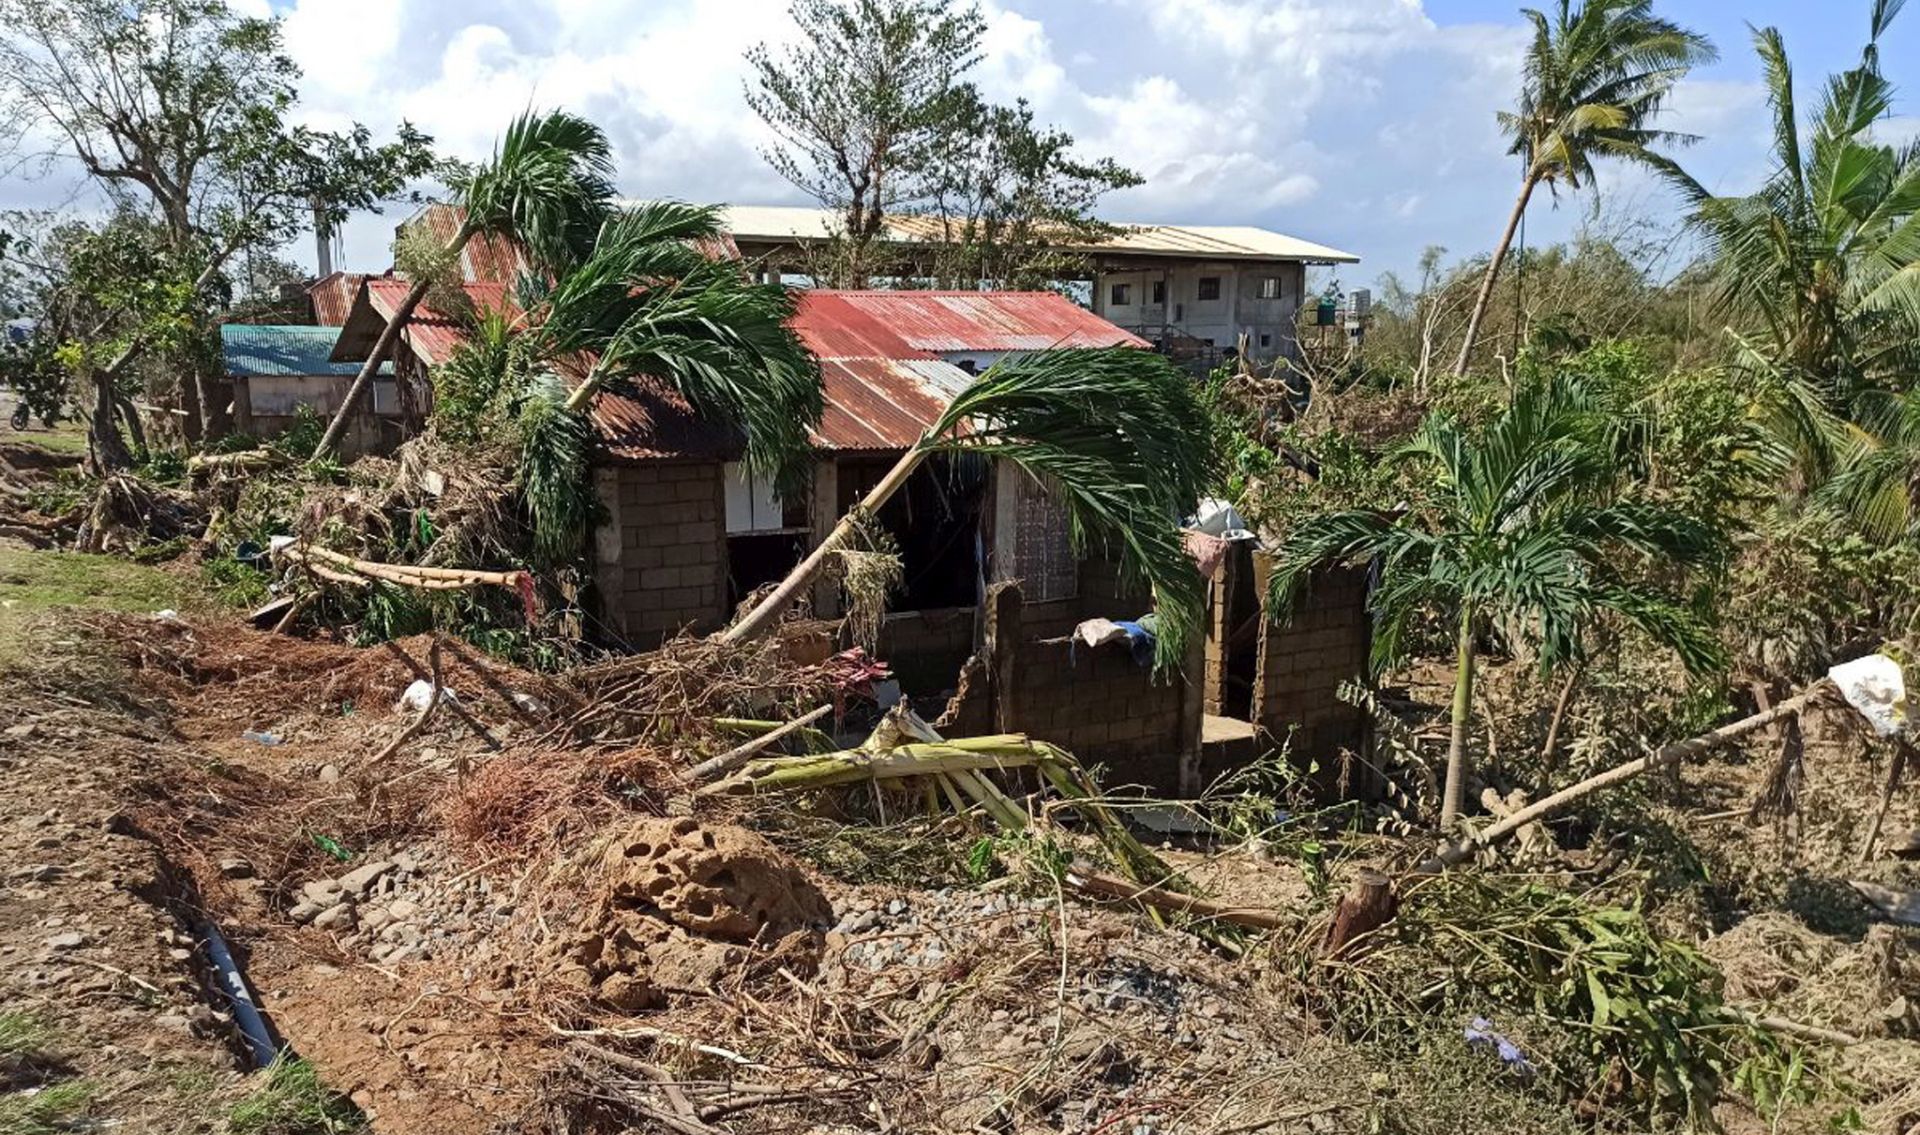 epa08090598 Toppled coconut trees rest on top of a home in the typhoon-hit town of Balasan, Ilo-Ilo province, Philippines, 26 December 2019. According to media reports, Typhoon Phanfone, locally known as Ursula, lashed the central Philippines on Christmas Day killing at least 16 people and causing damage to homes and rice fields.  EPA/LEO SOLINAP